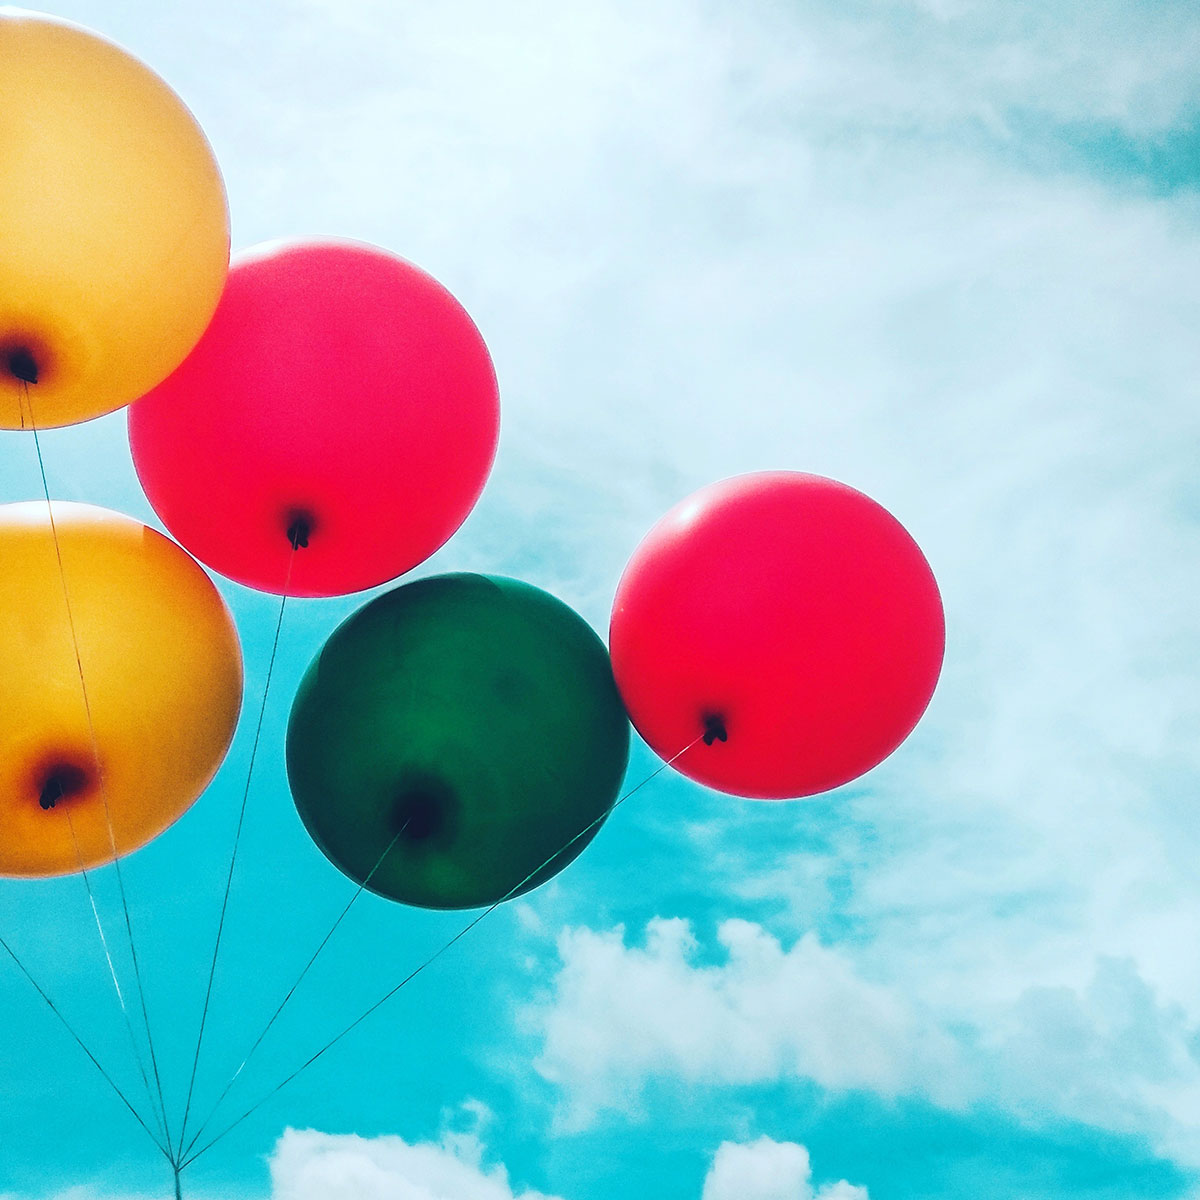 Five colorful balloons on a blue sky background